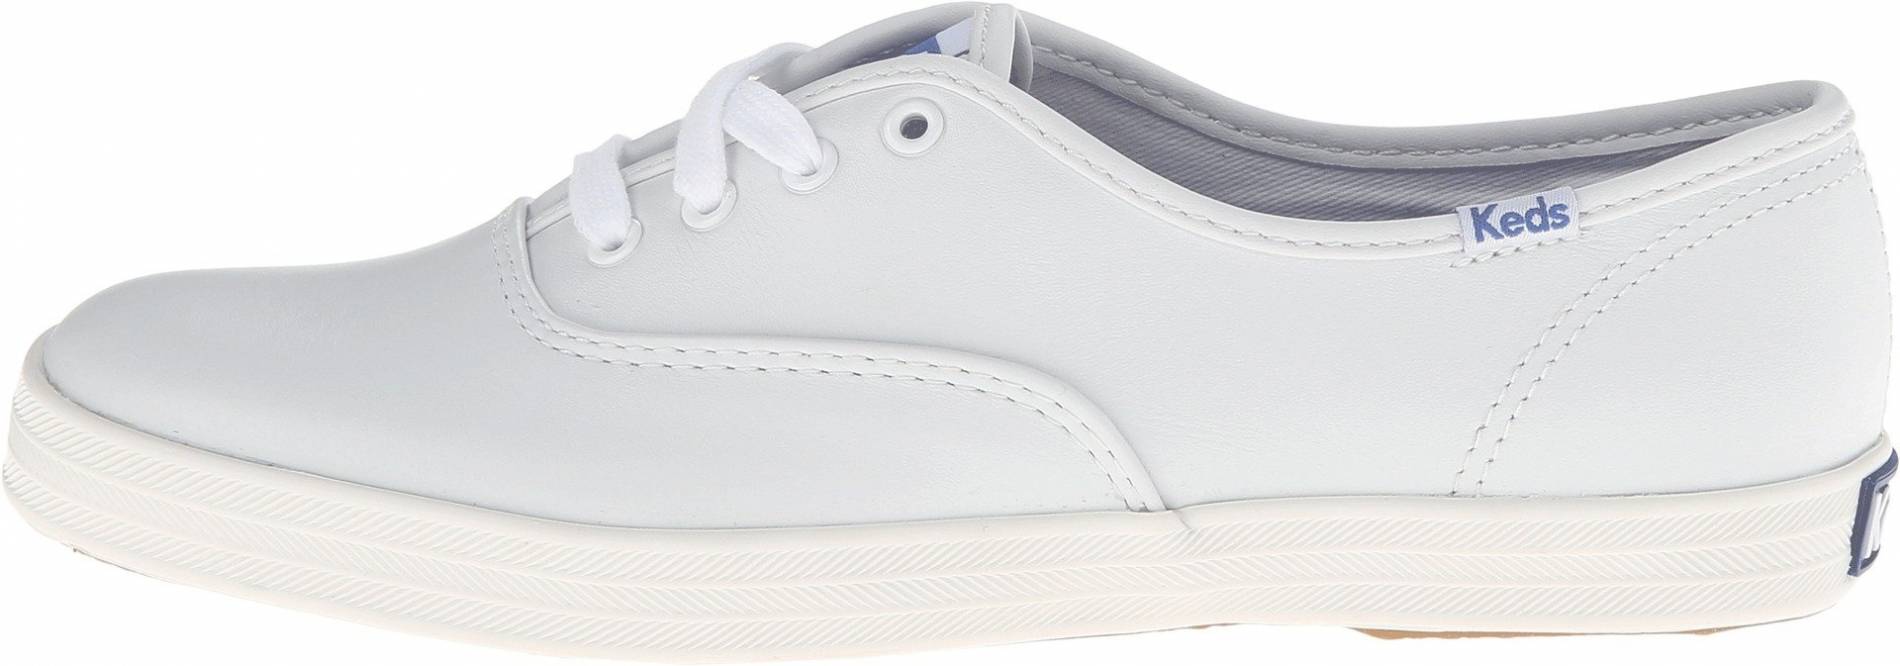 all white leather keds